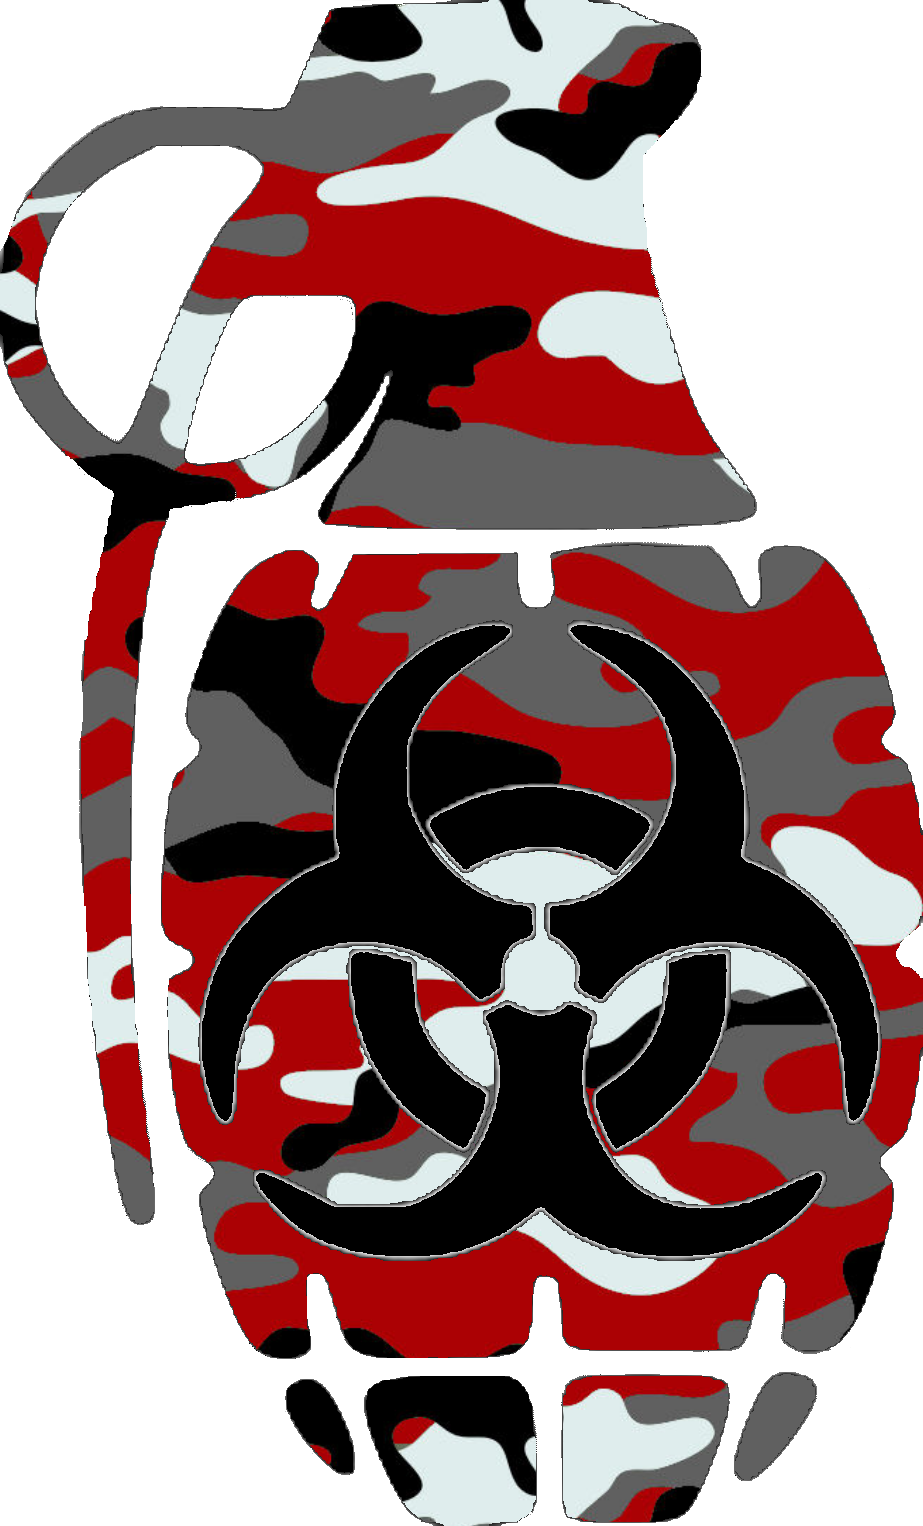 Red Camouflage Grenade Image - Visual Arts (923x1526)